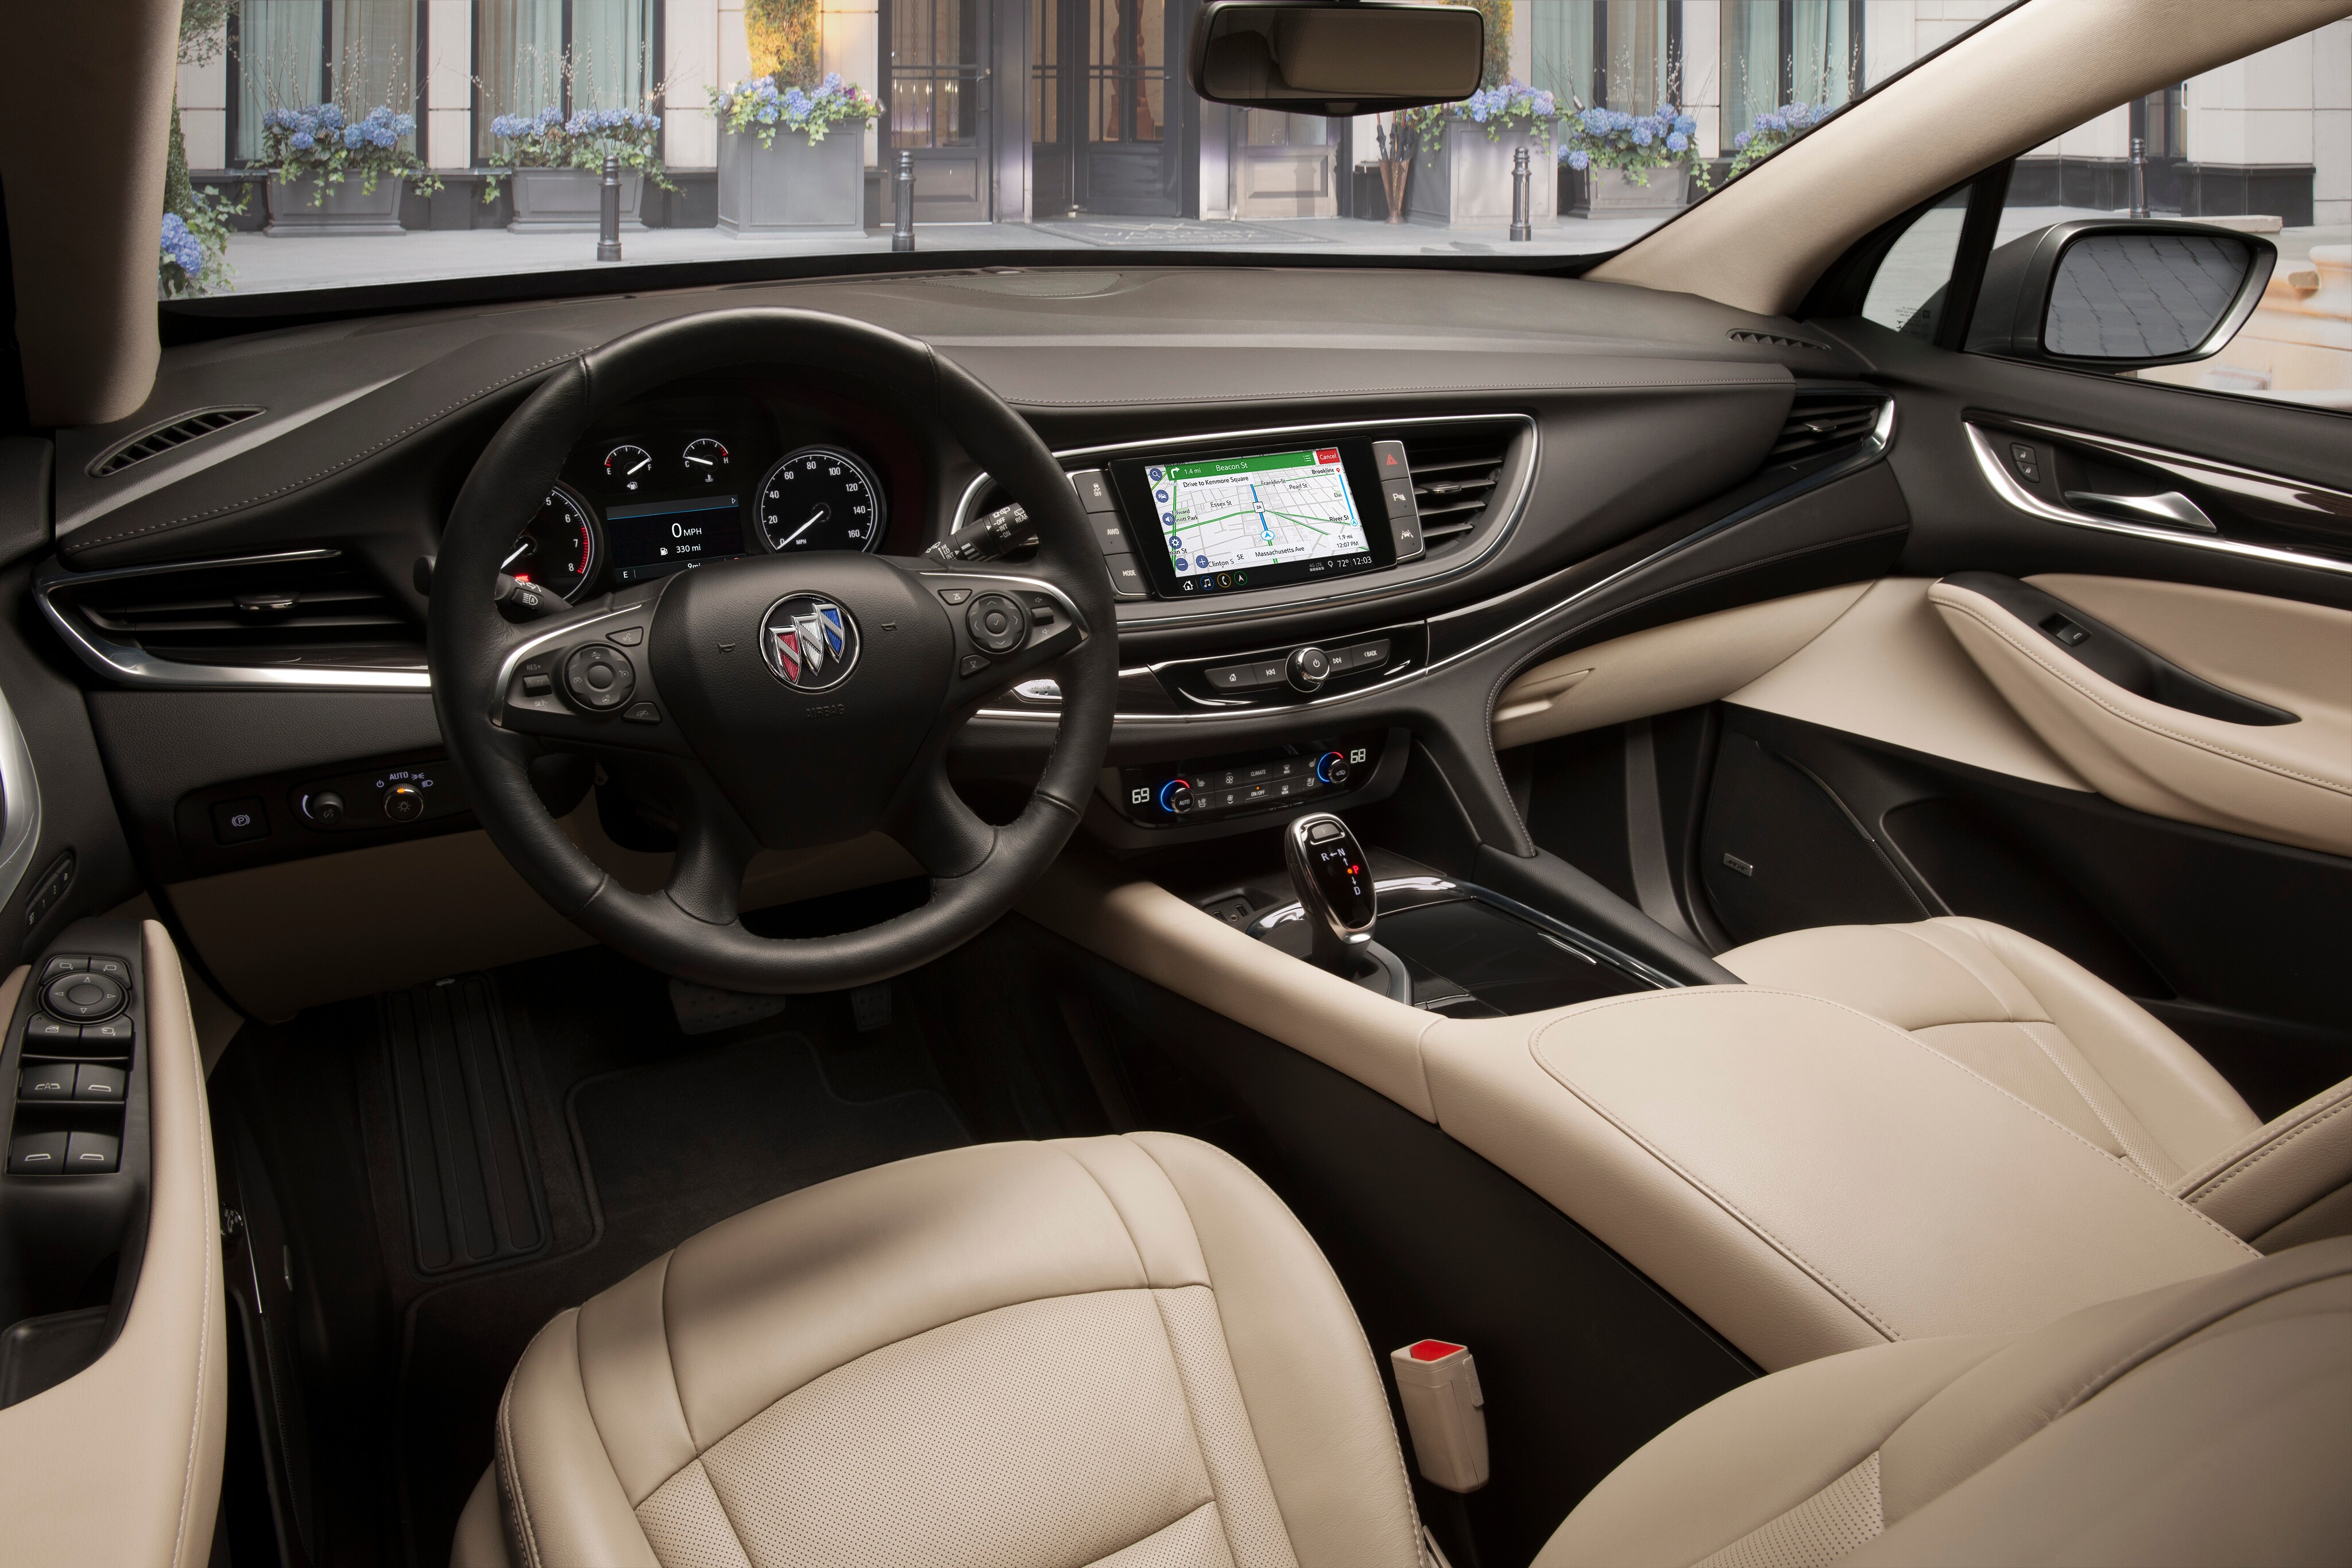 Interior View of Buick Enclave